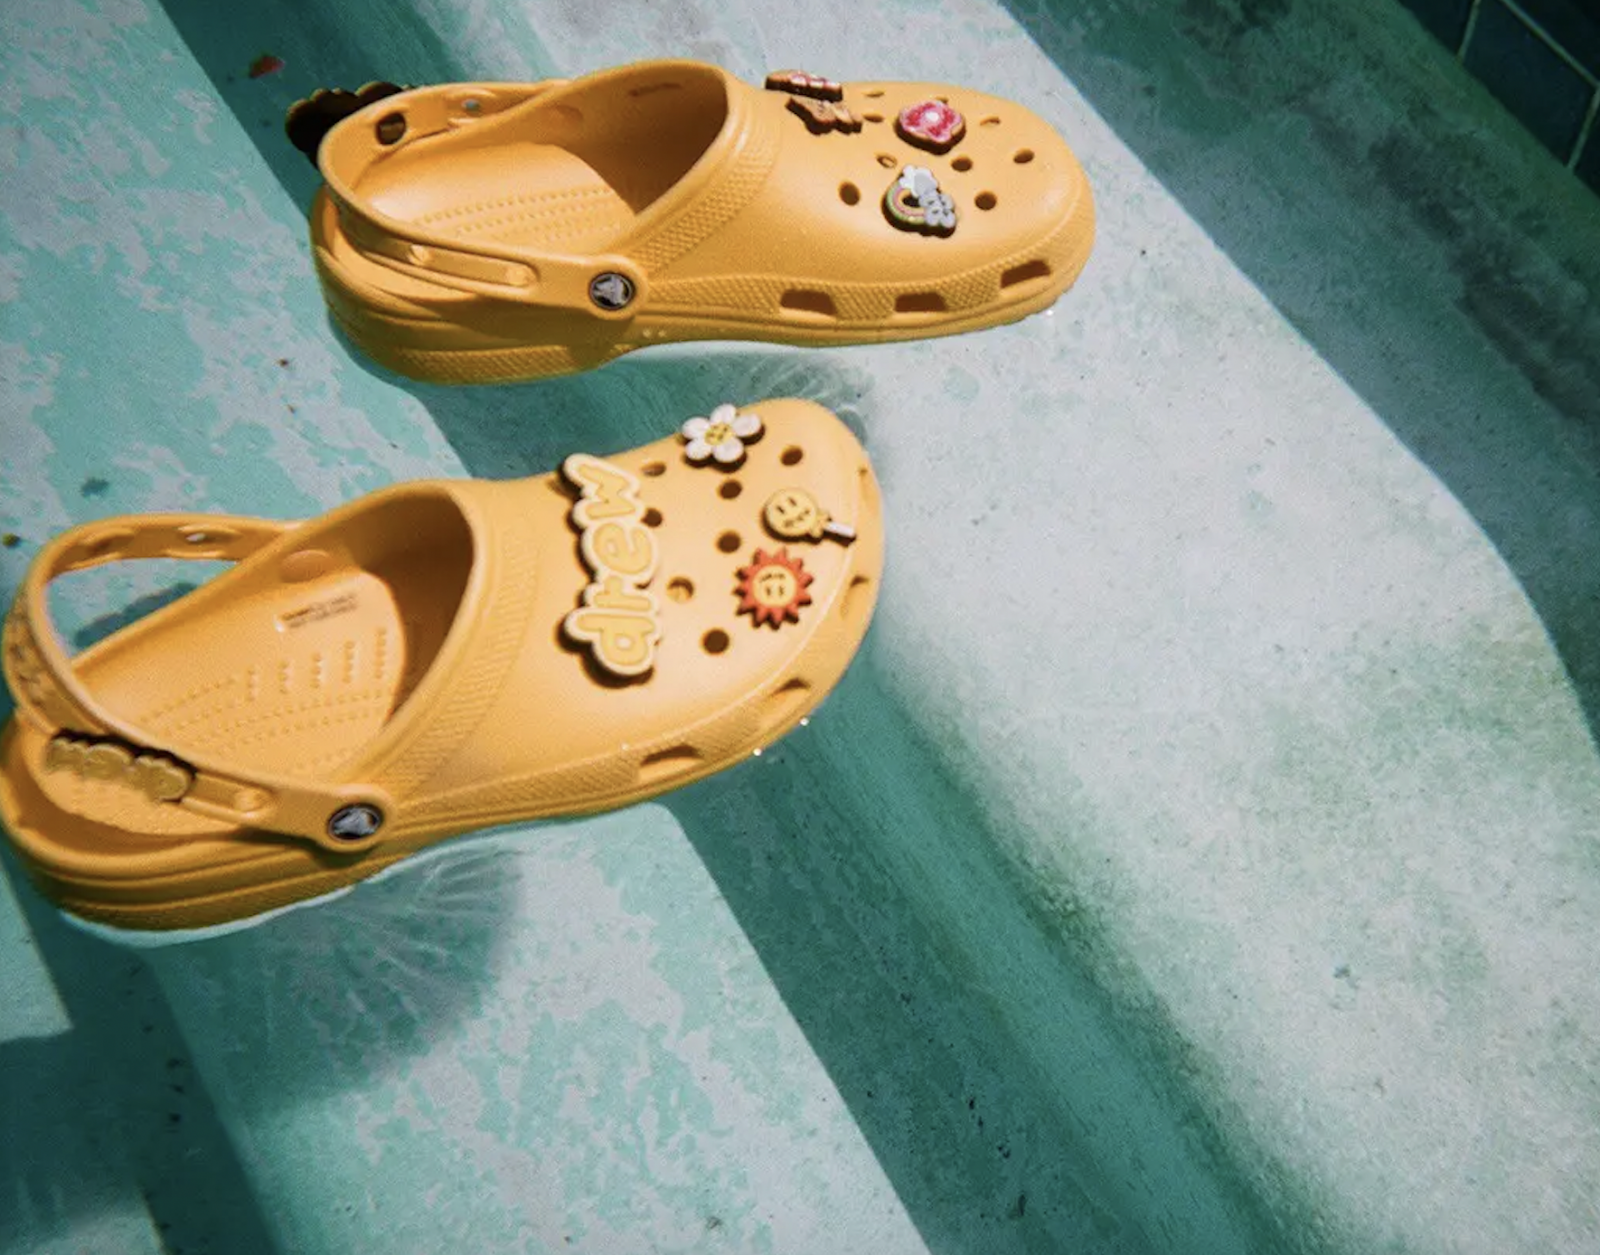 Crocs ad featuring yellow Crocs floating in a pool